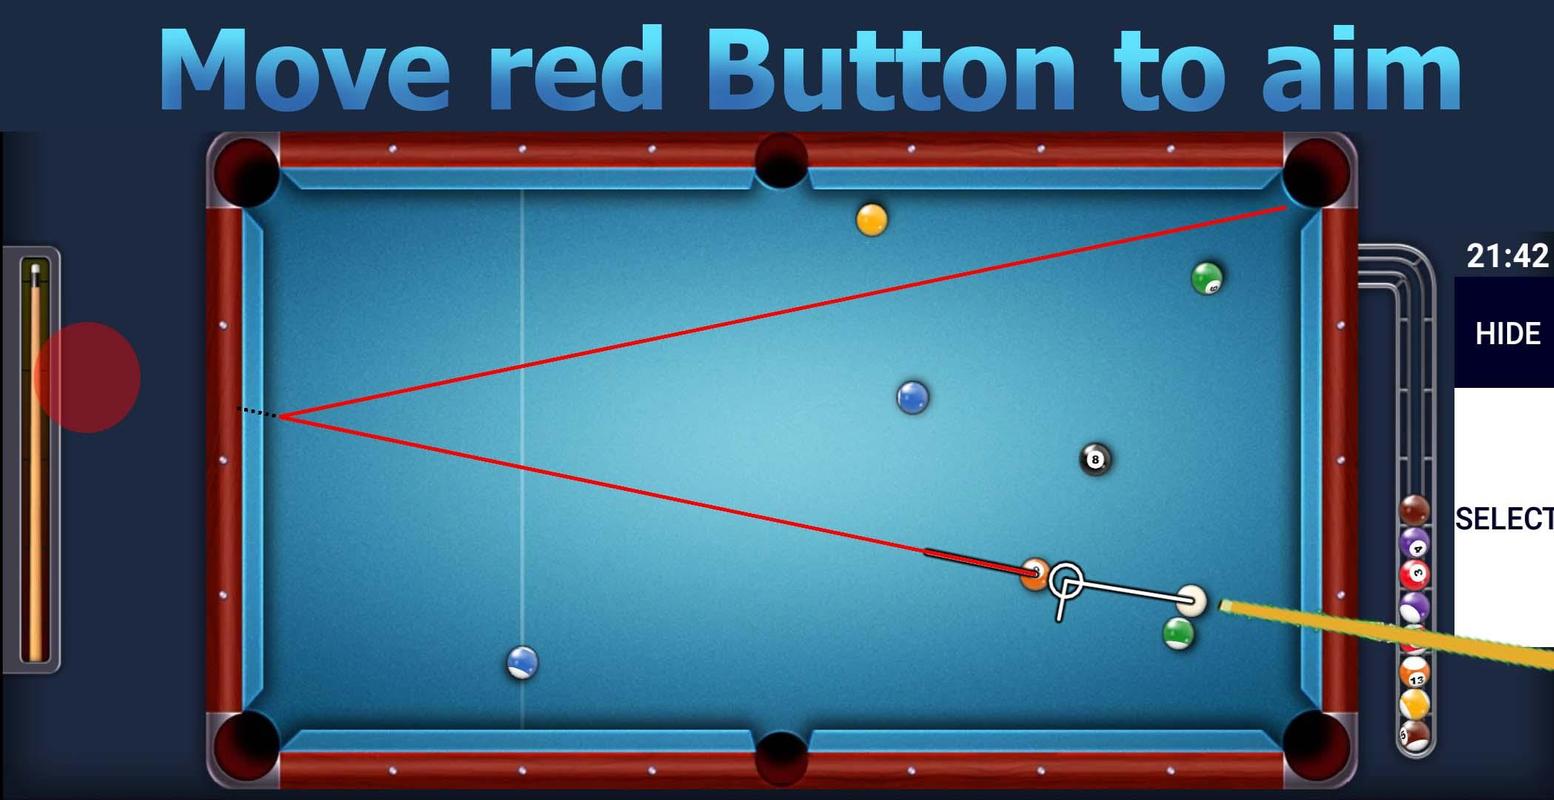 8 Ball Pool Trainer for Android - APK Download